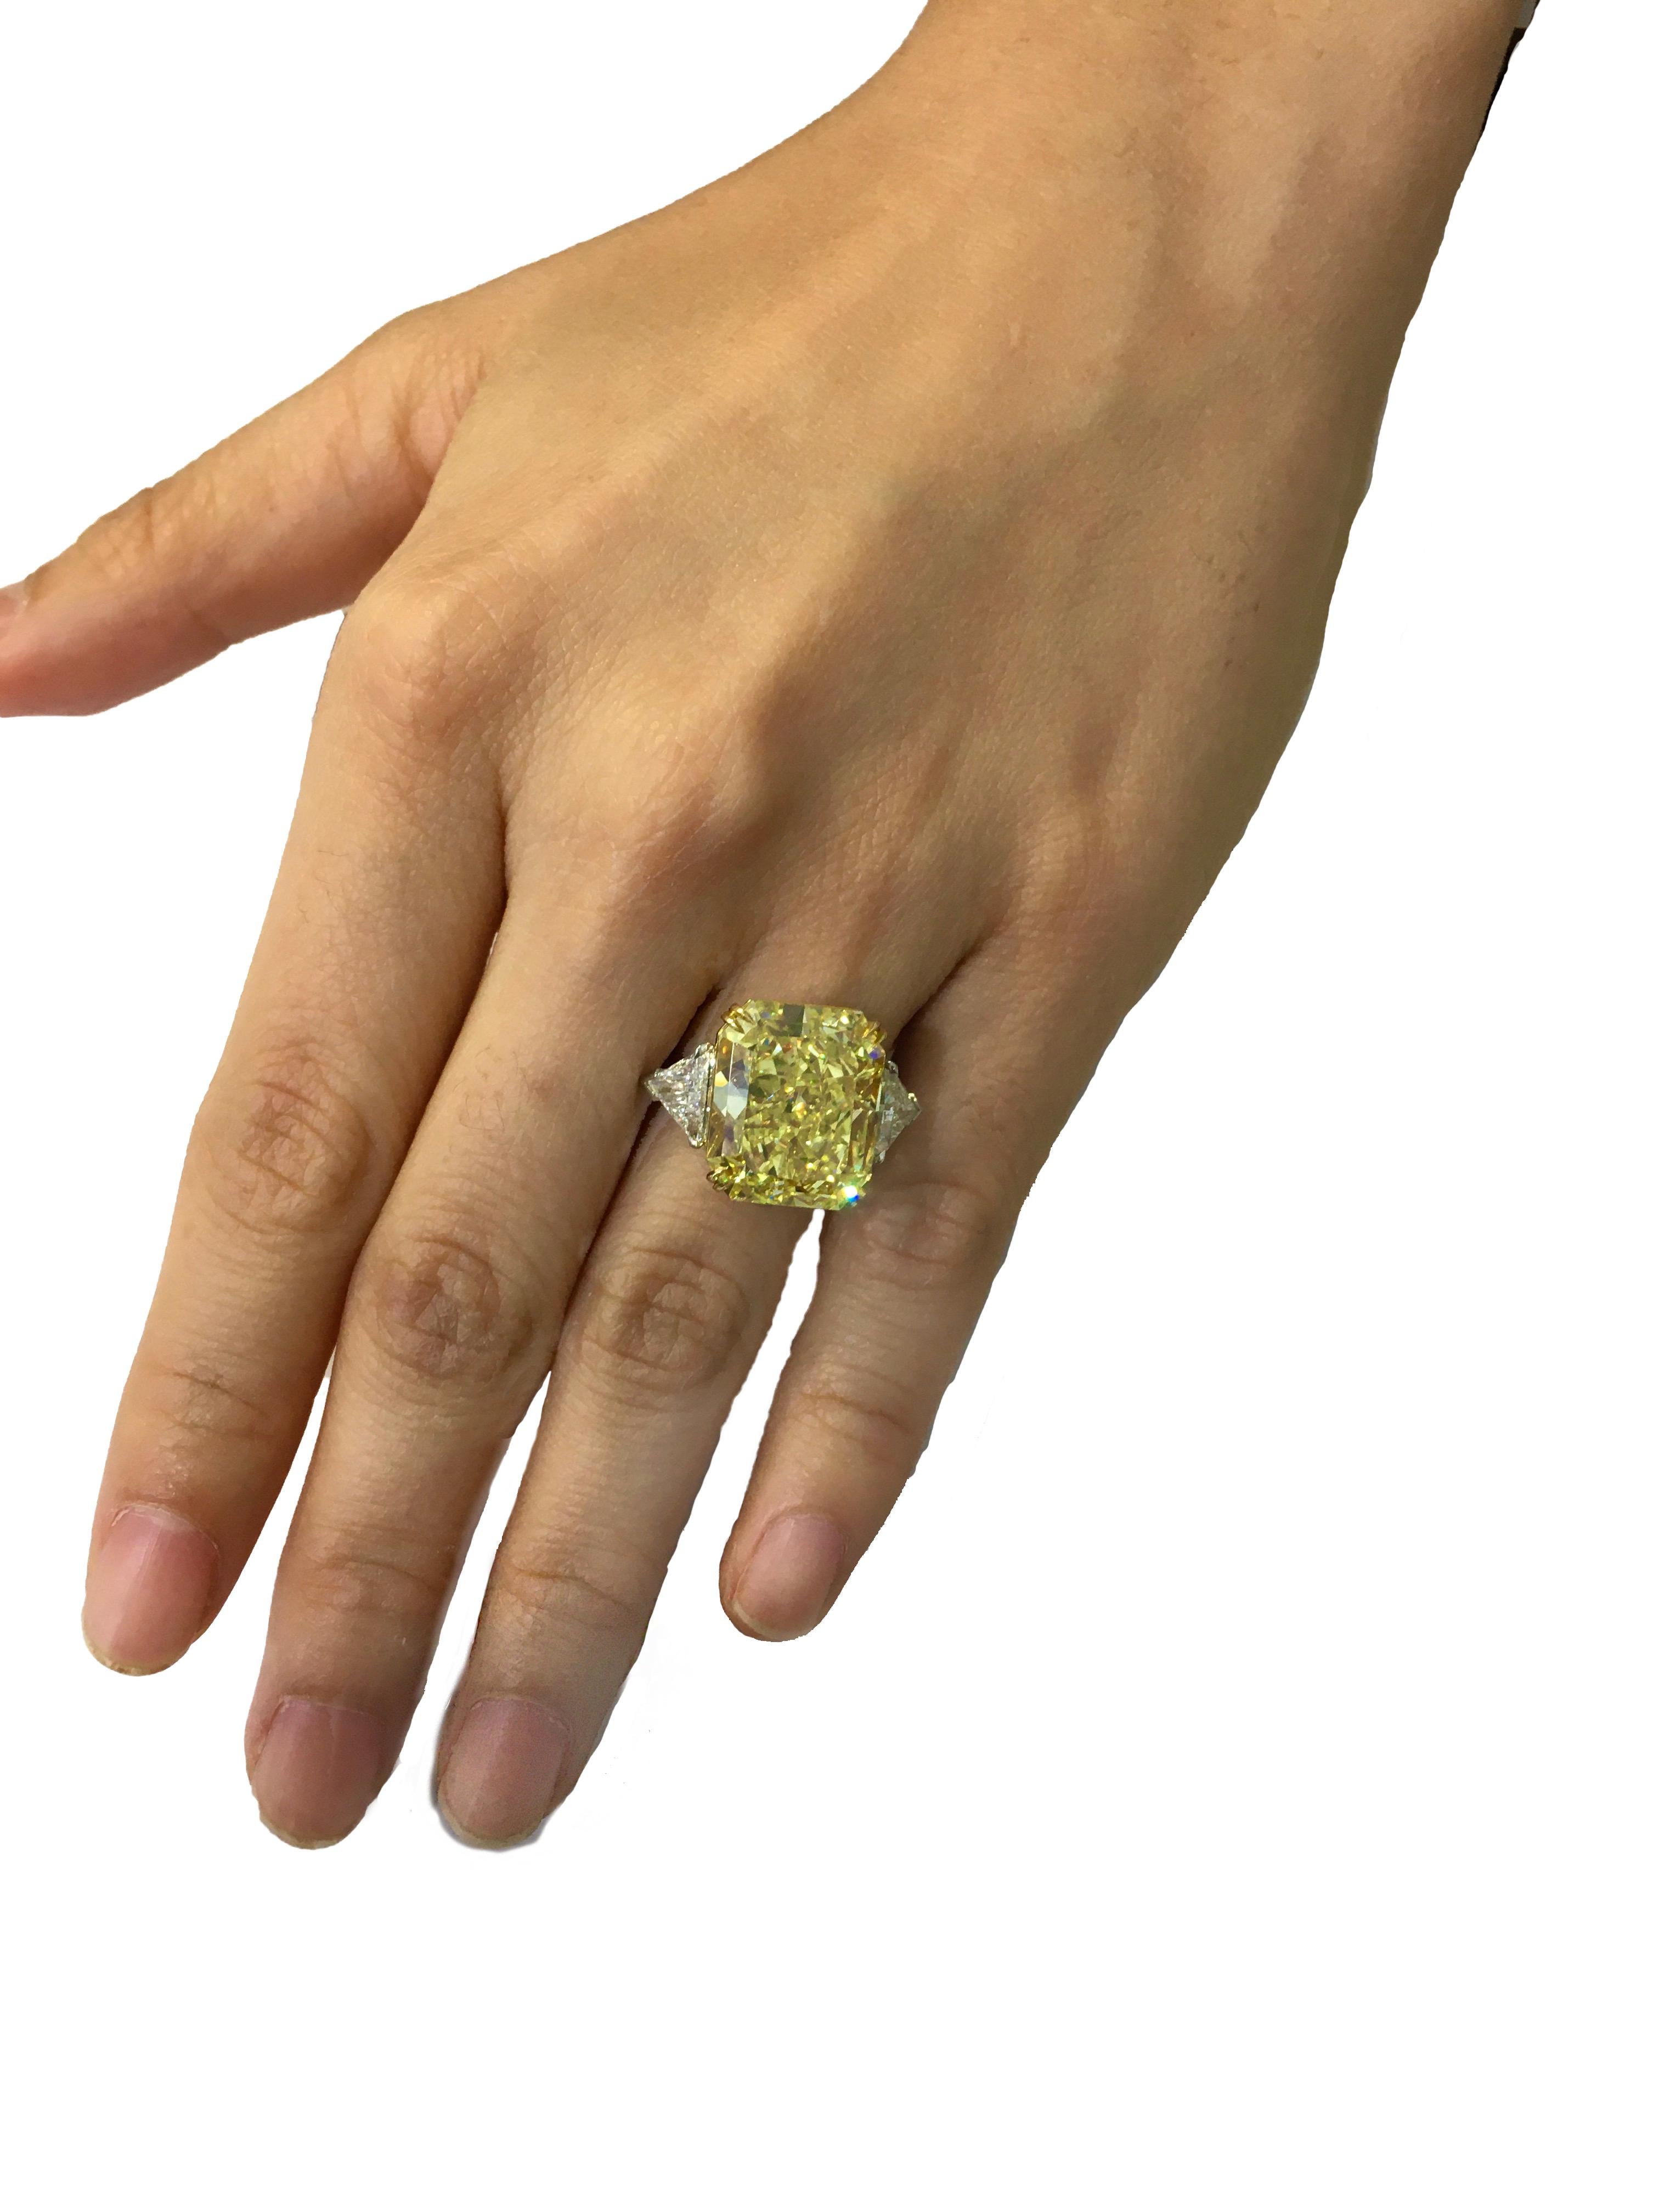 Only the best!
Fancy Intense Yellow Radiant Shape Diamond Ring
Center diamond is:
Size     14.71 carat 
Color   FIY (Fancy Intense Yellow) 
Clarity VS1 
GIA # xxxxxxxx
Set in platinum with two trillion shape diamonds with 2.40 carat, D color VS1